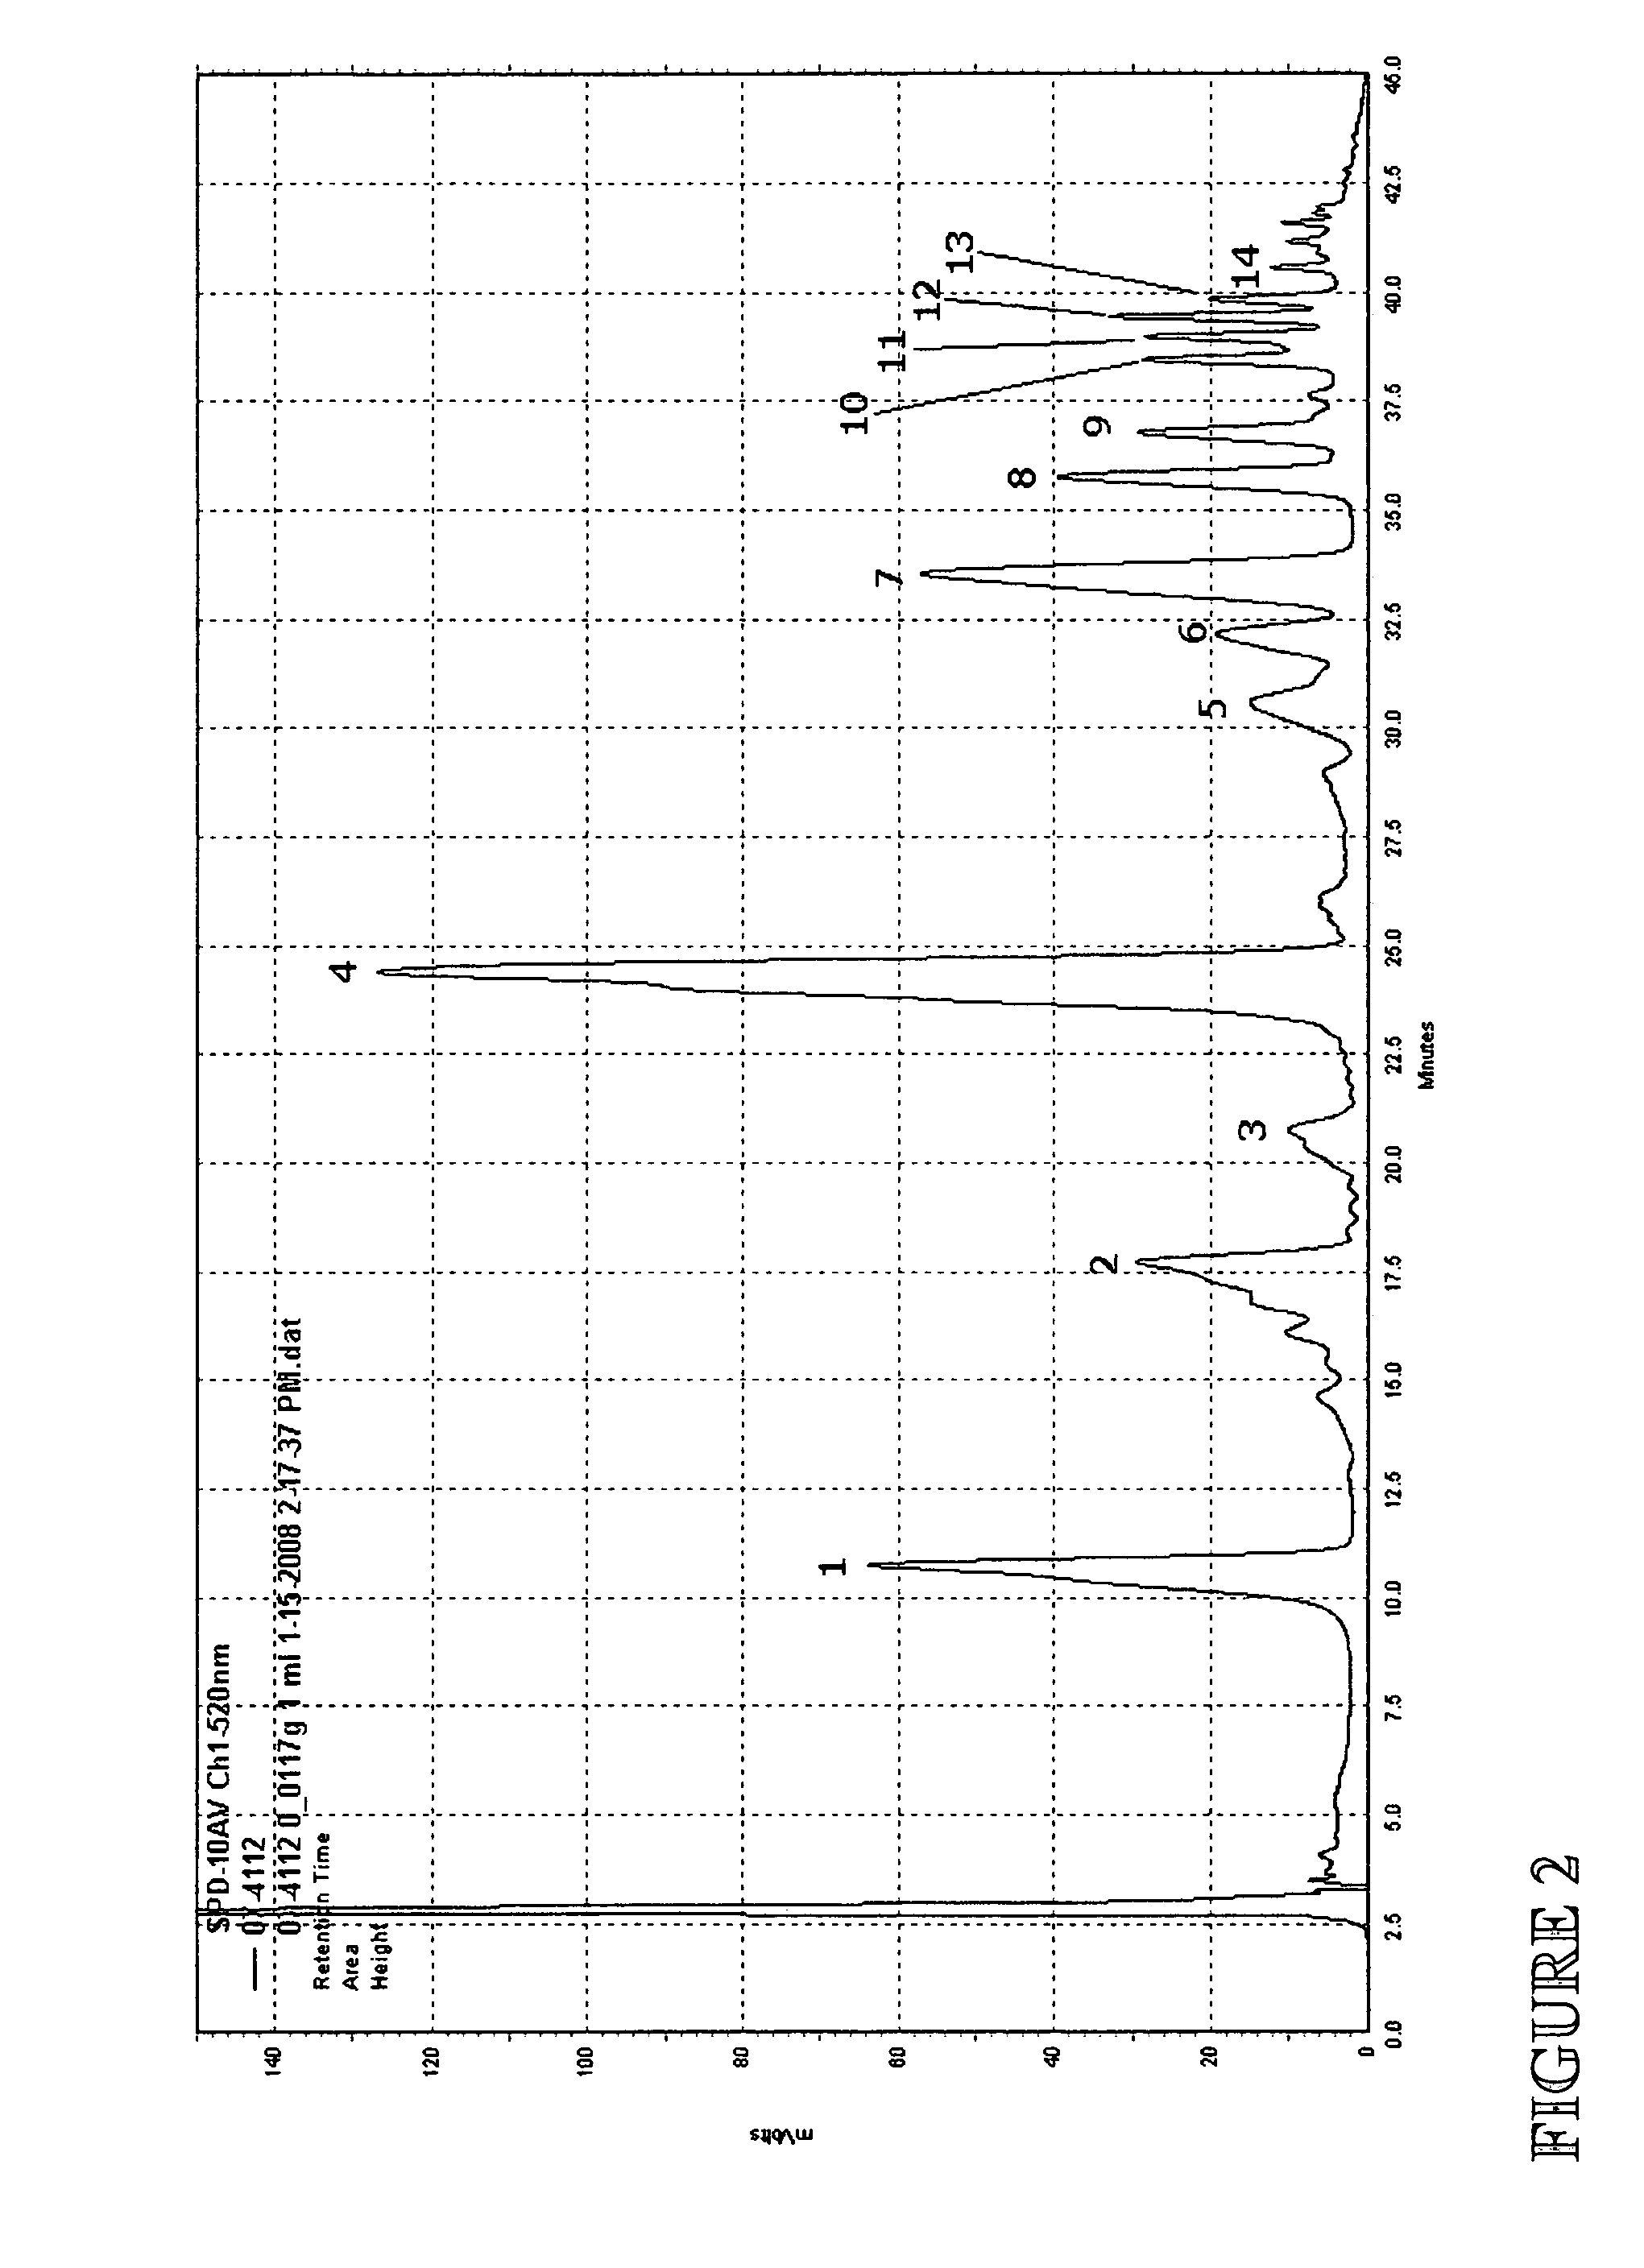 Anthocyanin pigment/dye compositions and method of providing composition through extraction from corn